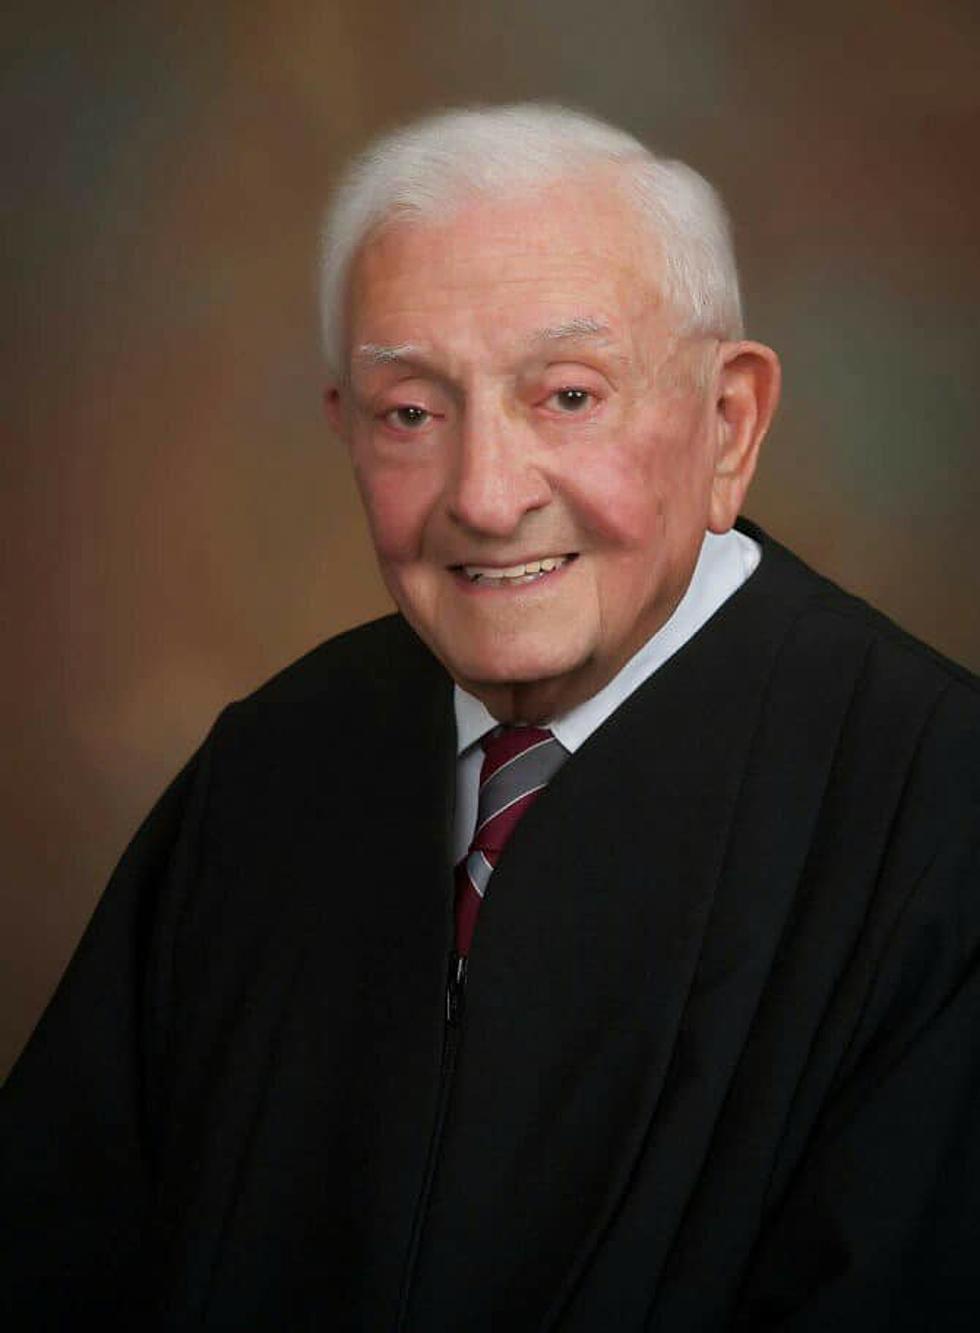 A Way We Can All Honor Judge Kaliste Saloom